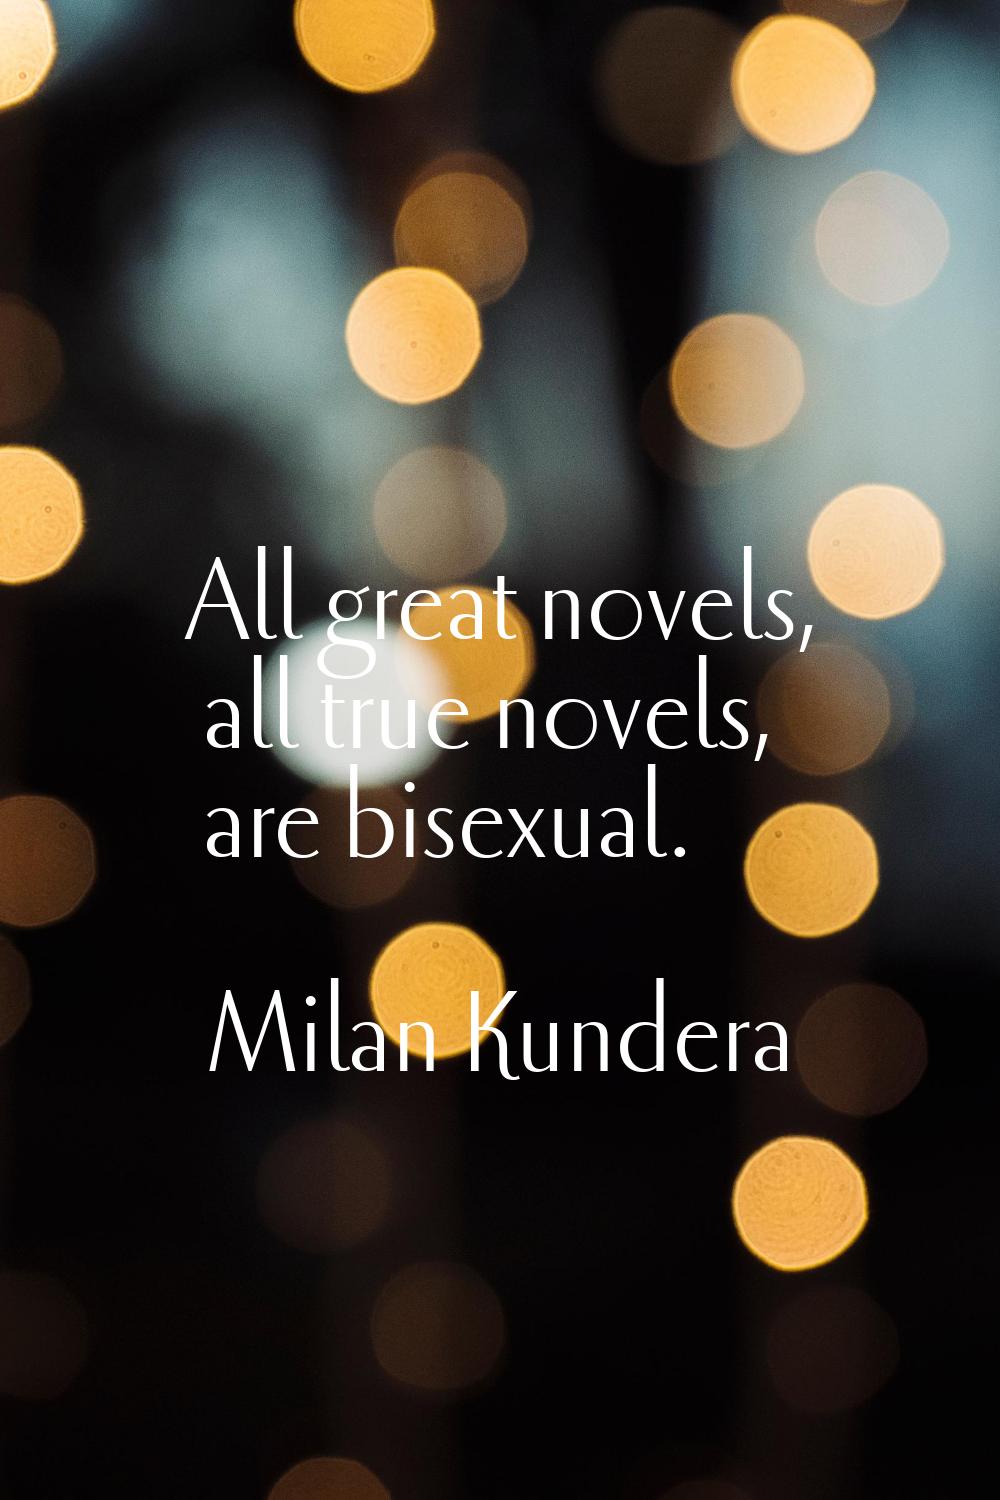 All great novels, all true novels, are bisexual.